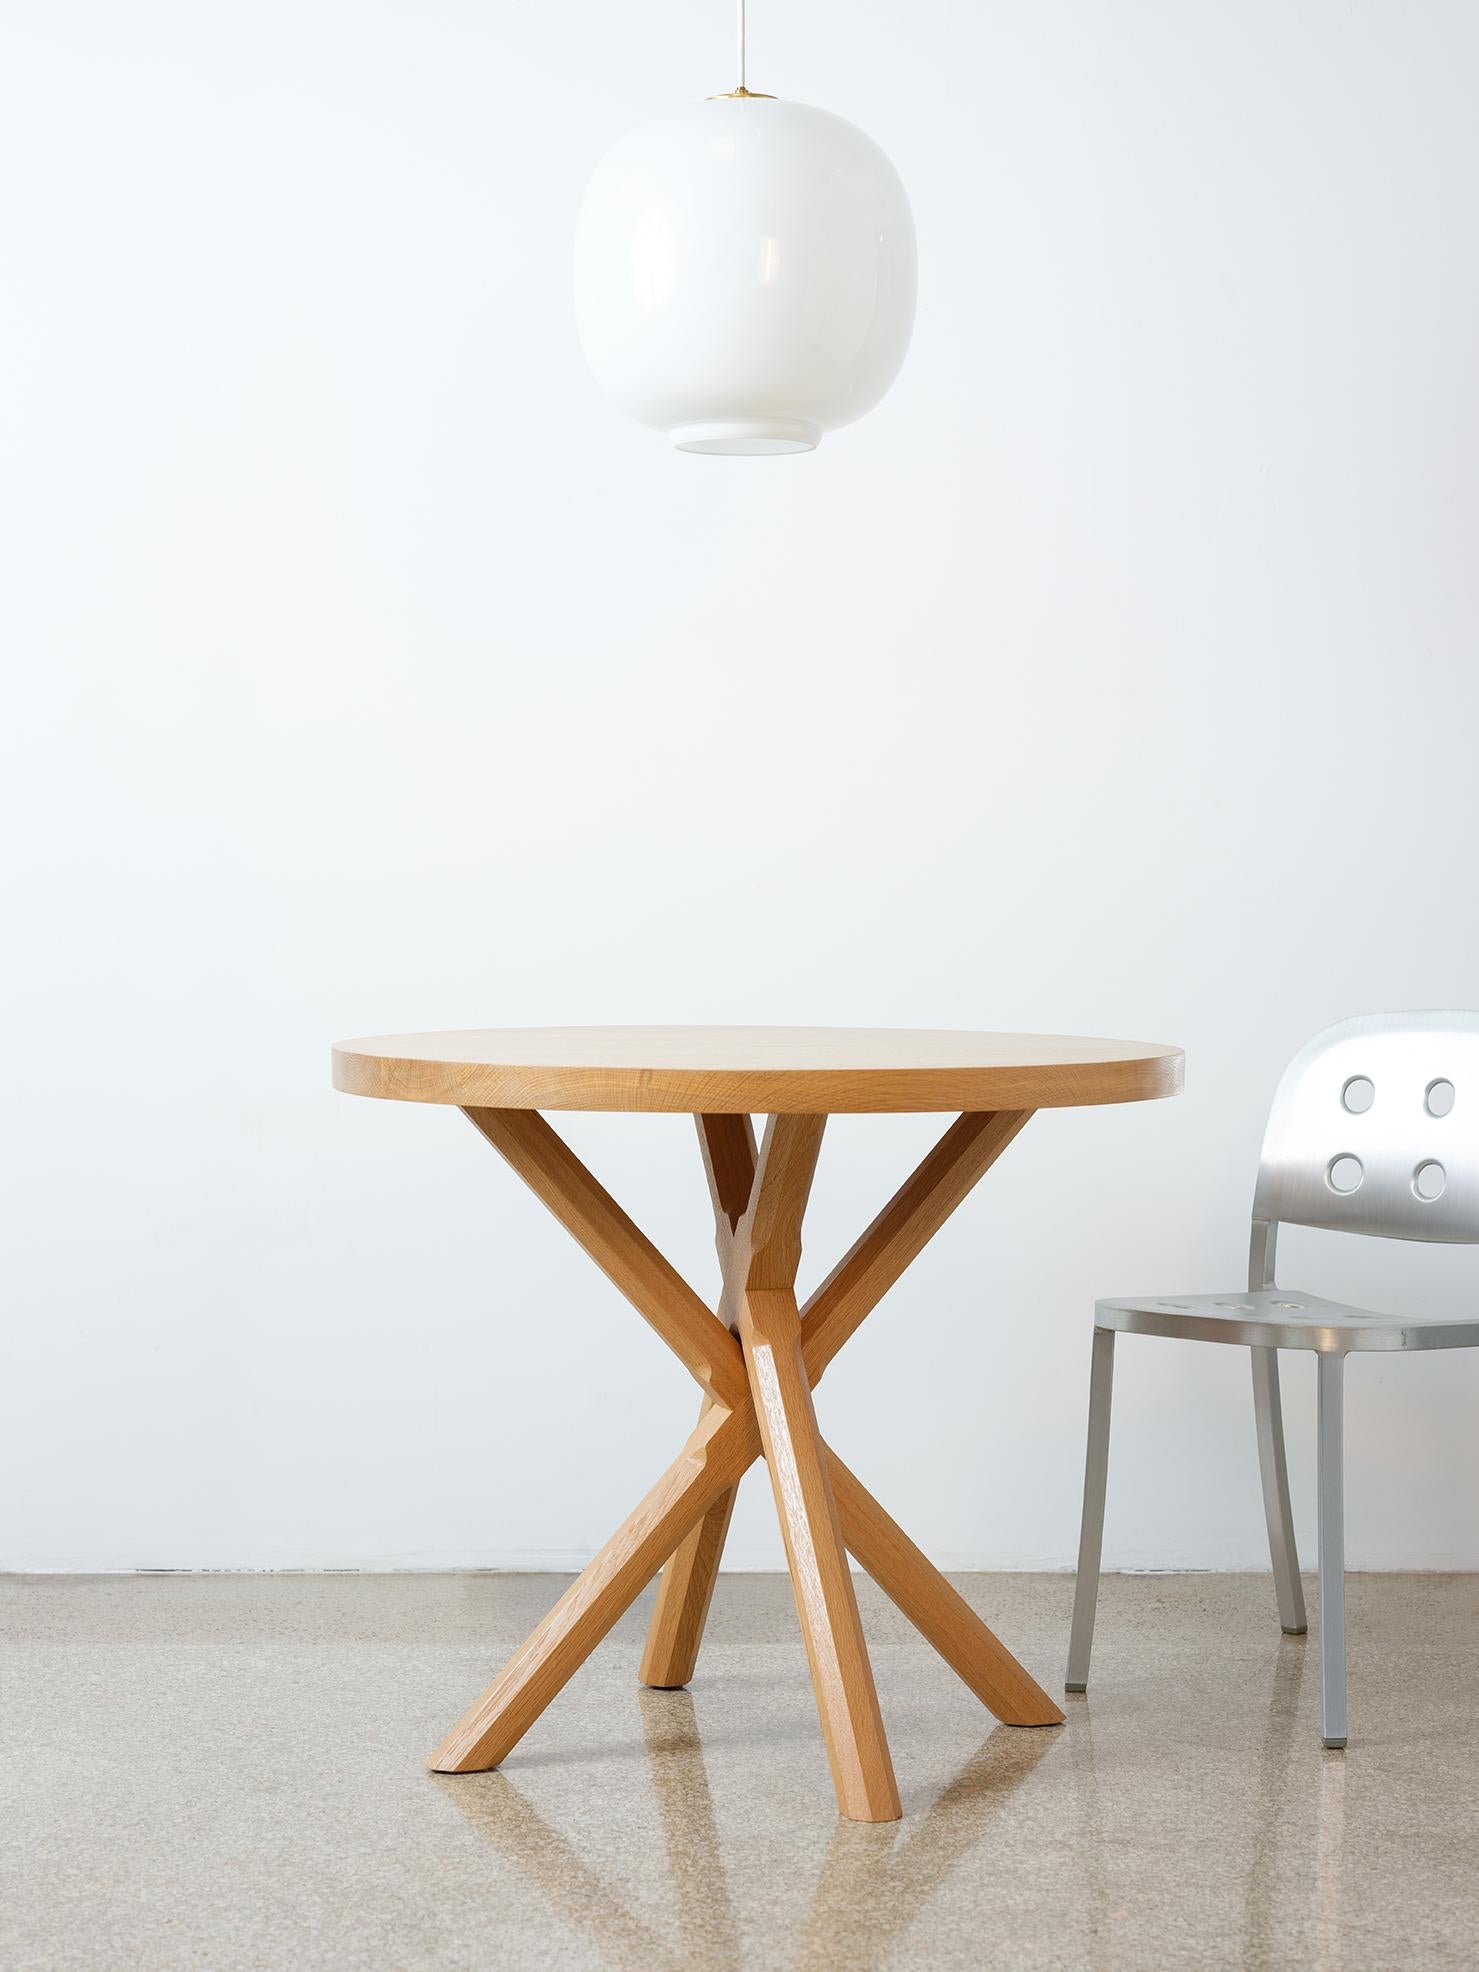 This modern compact pedestal table features all-hardwood construction. The chunky table top sits atop an X-shaped base with intricately carved polygonal legs. The legs are two separate components making it easy to disassemble, pack, and transport.